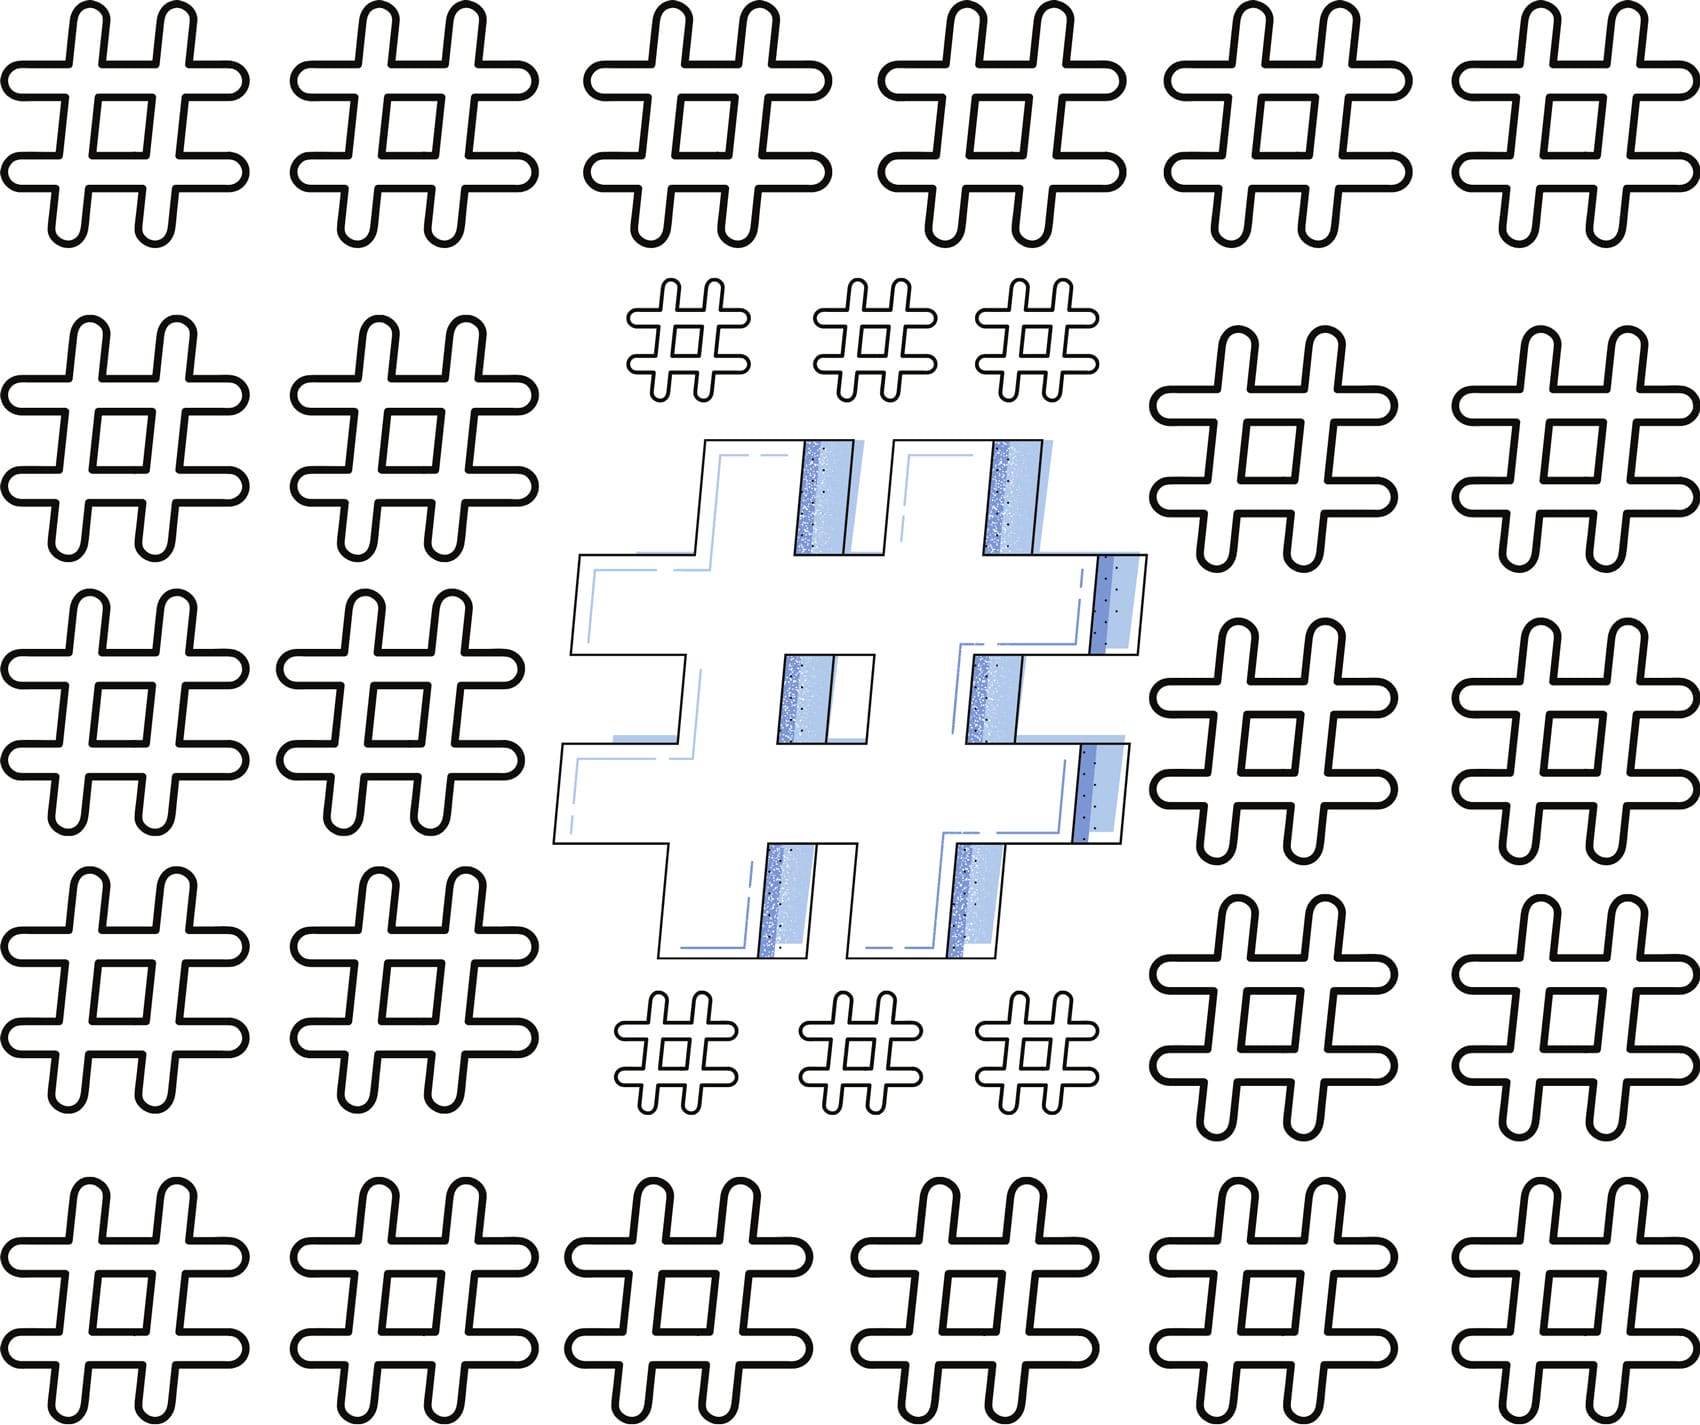 Image of a pattern of hashtags on a white background